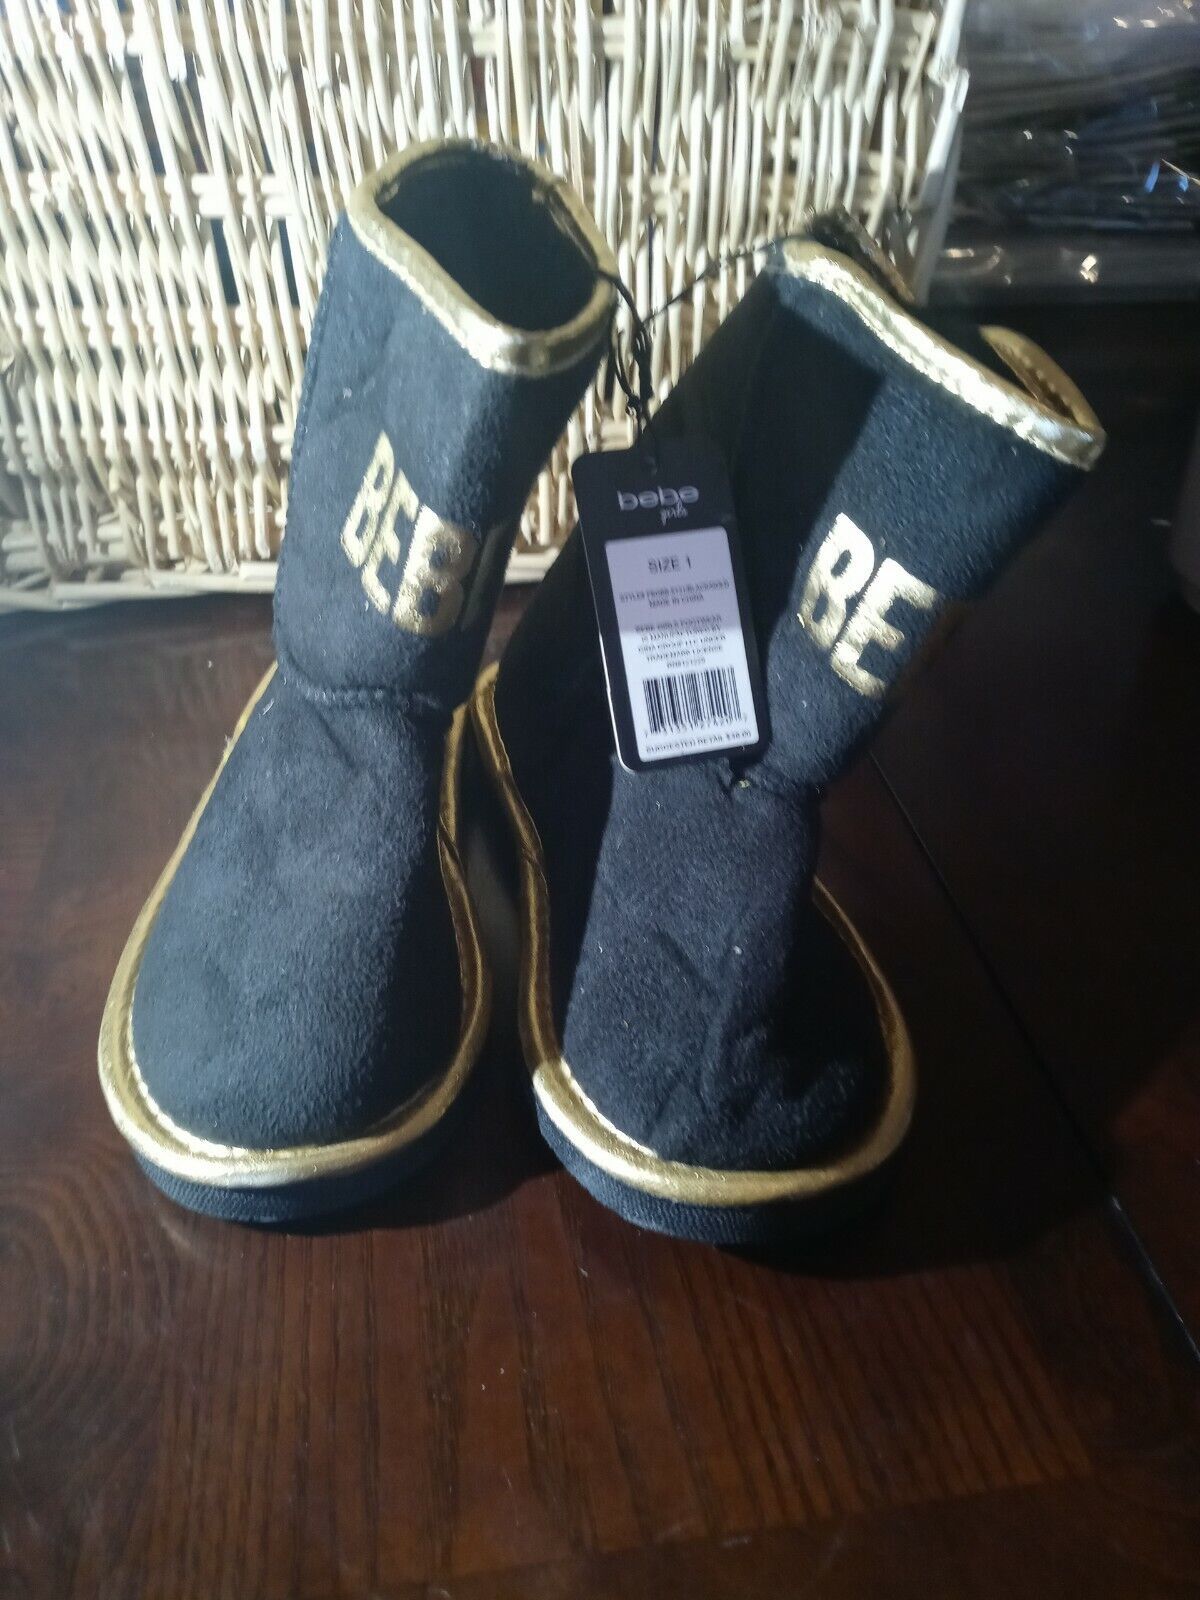 Bebe Size 1 Girls Boots